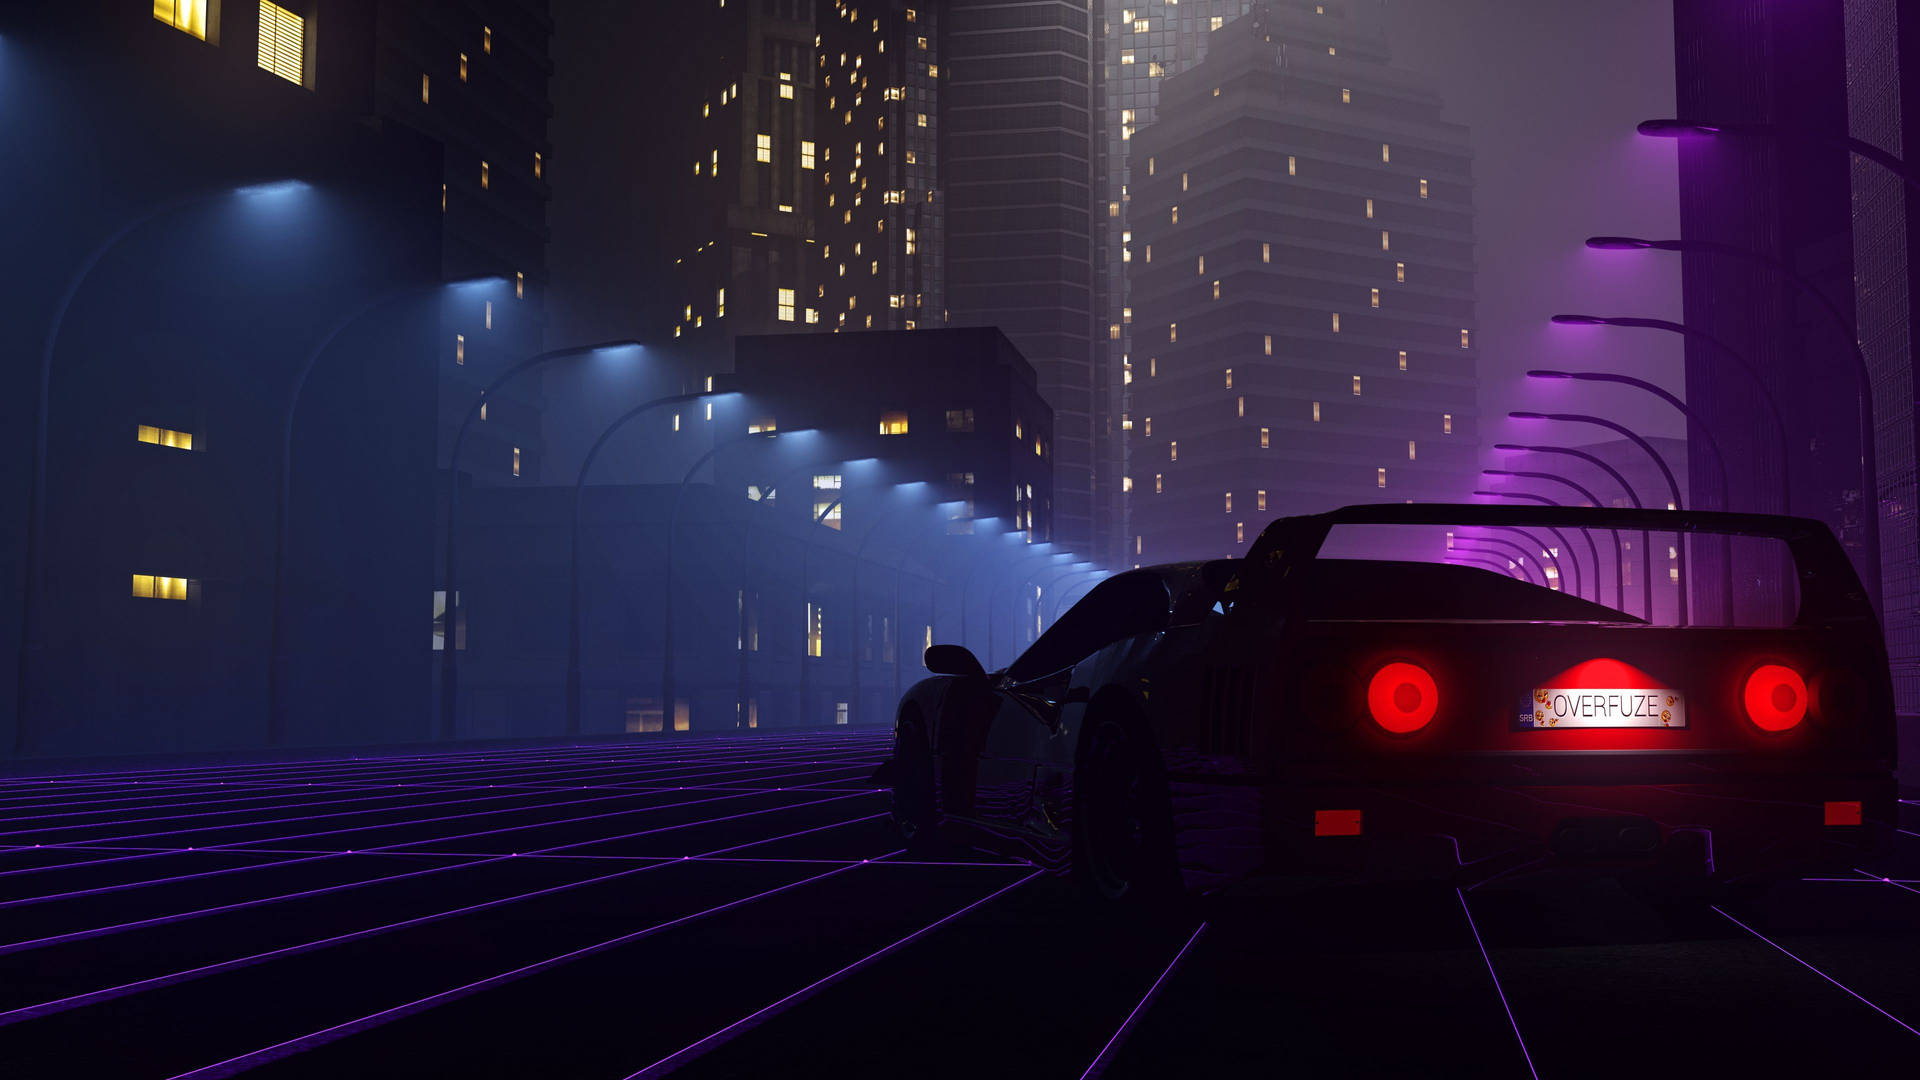 Download Outrun Futuristic Video Game Wallpaper | Wallpapers.com